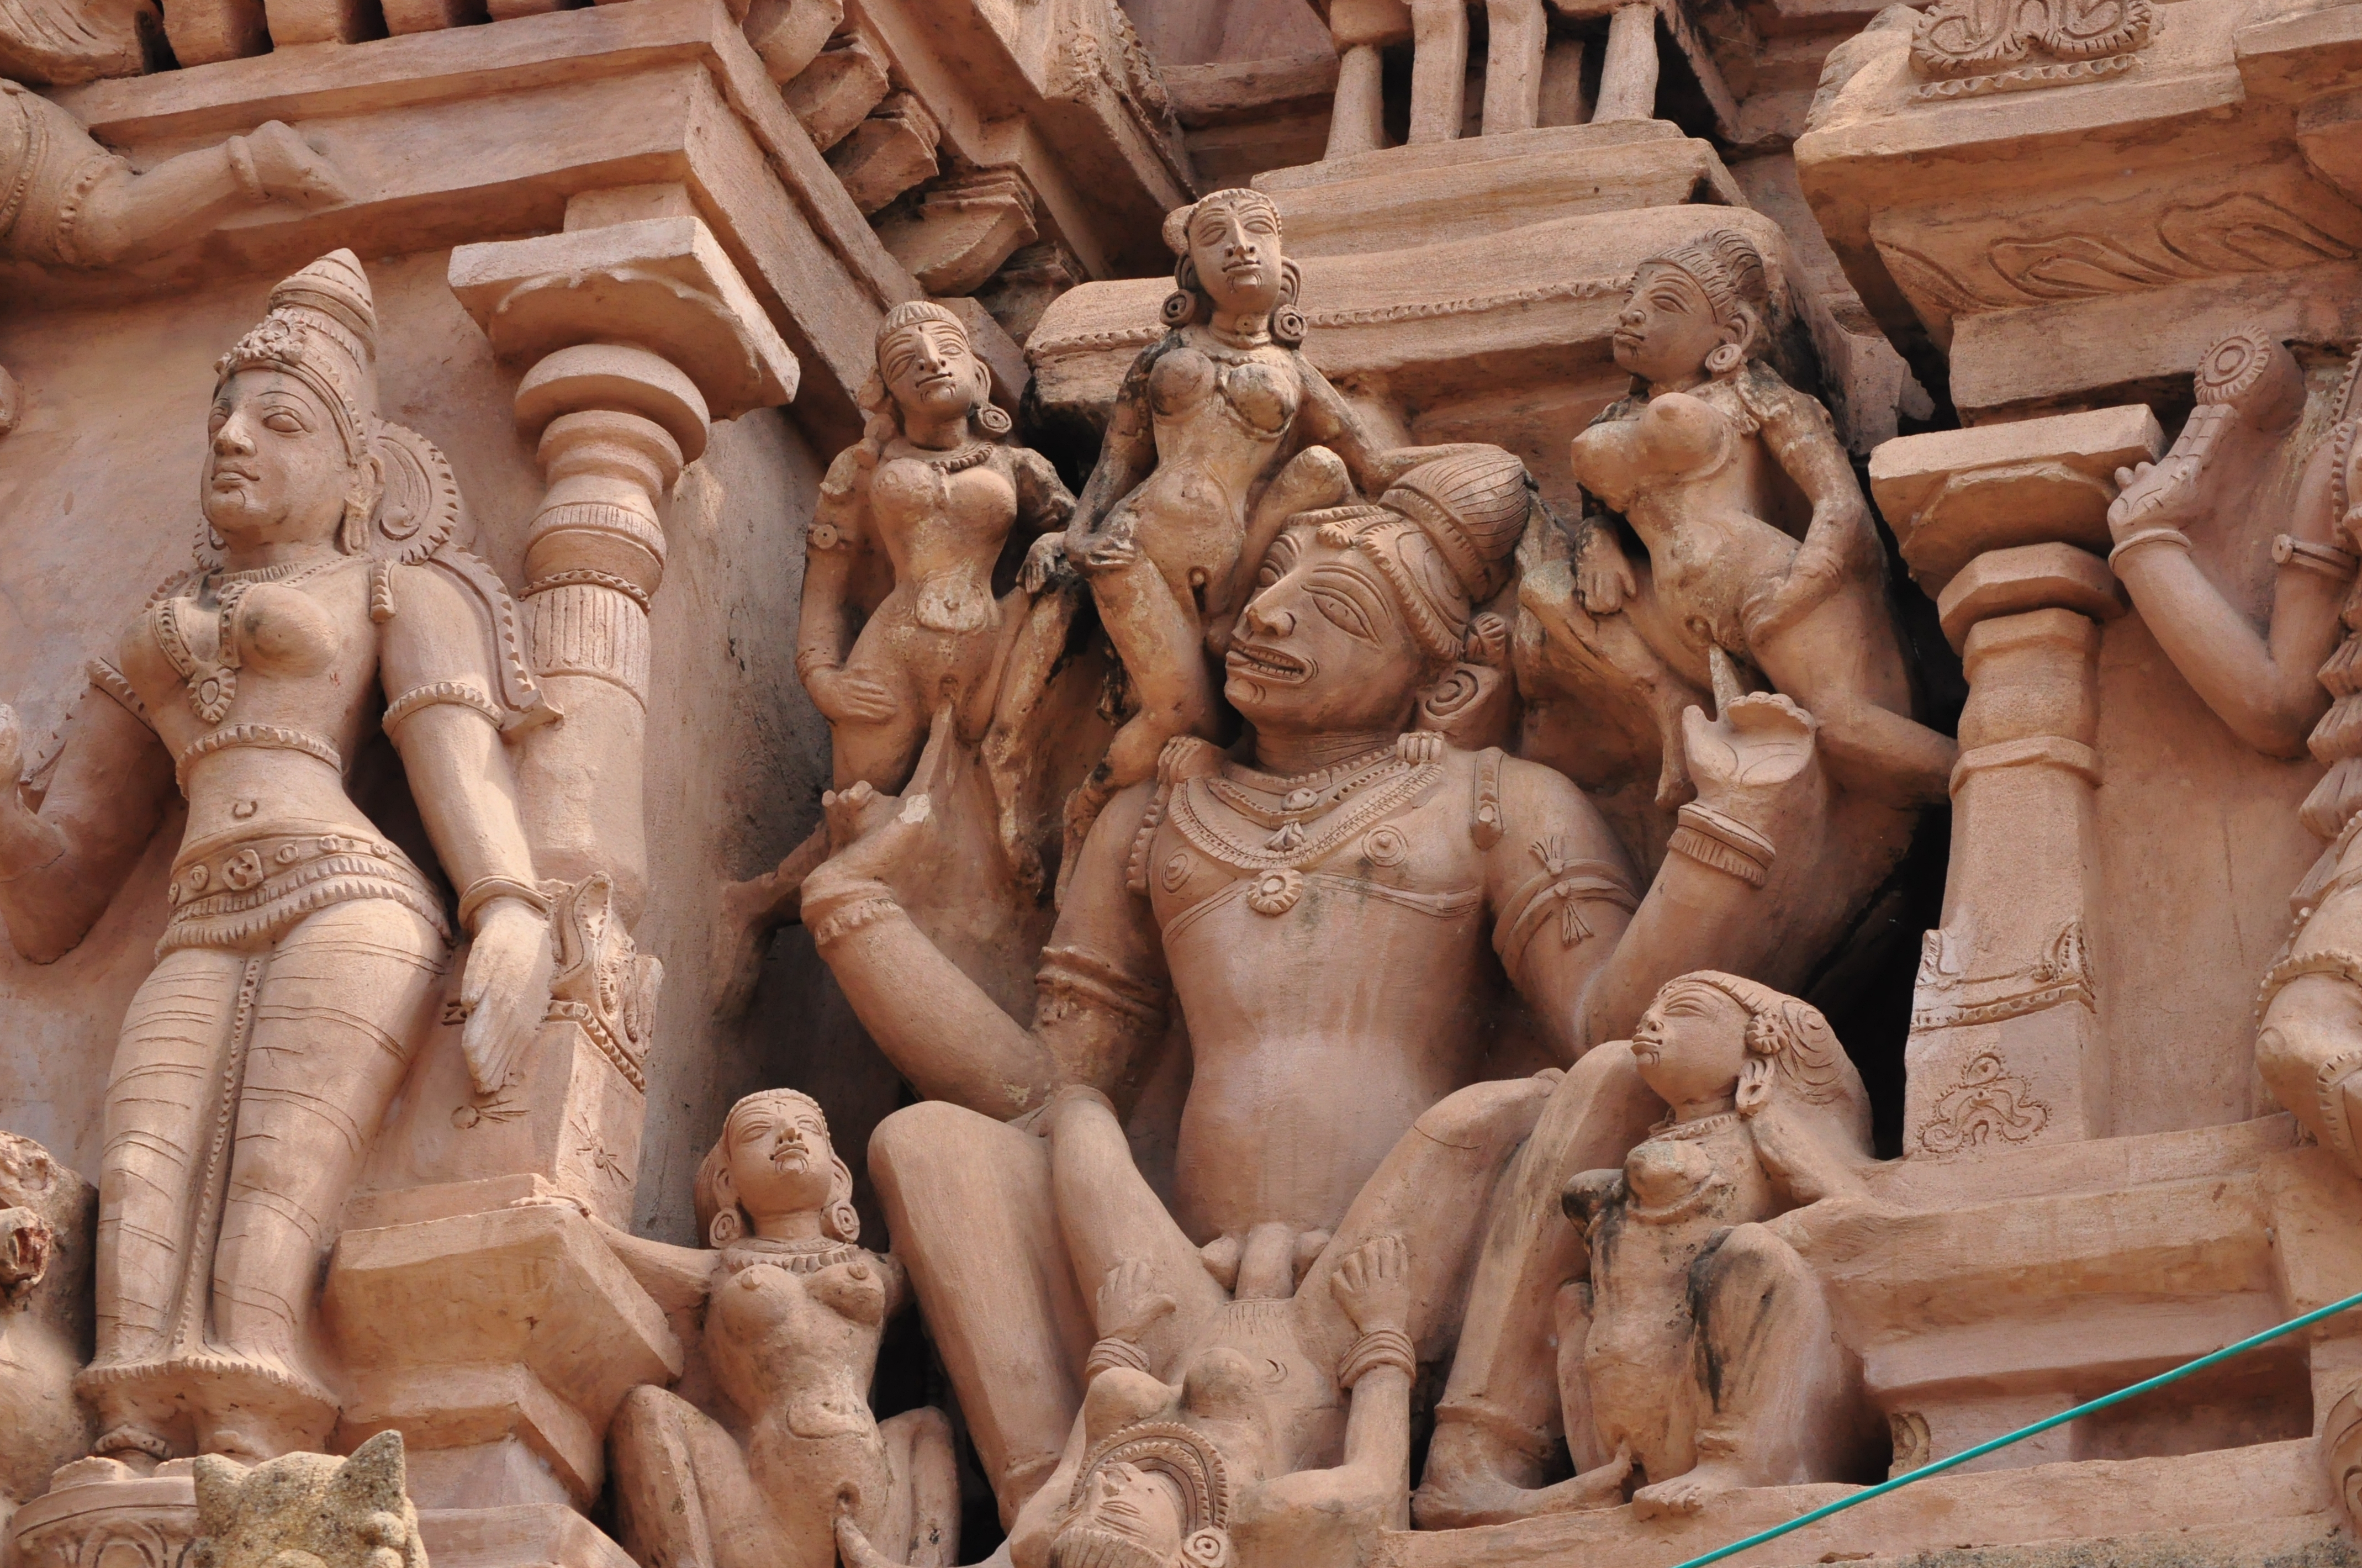 File:Sex statue in temple.jpeg - Wikimedia Commons